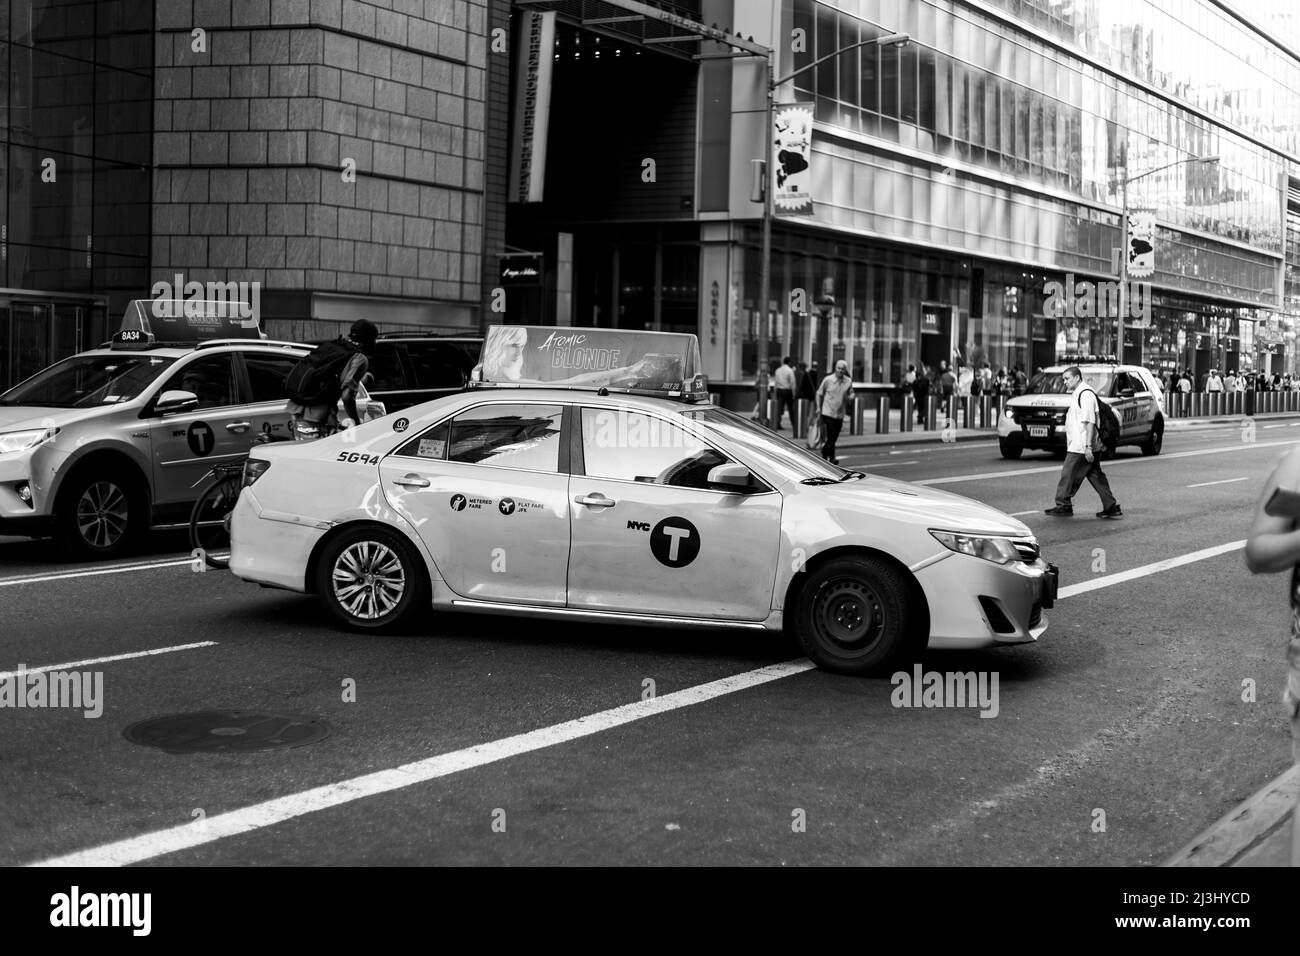 Theatre District, New York City, NY, Etats-Unis, taxi Turning Banque D'Images